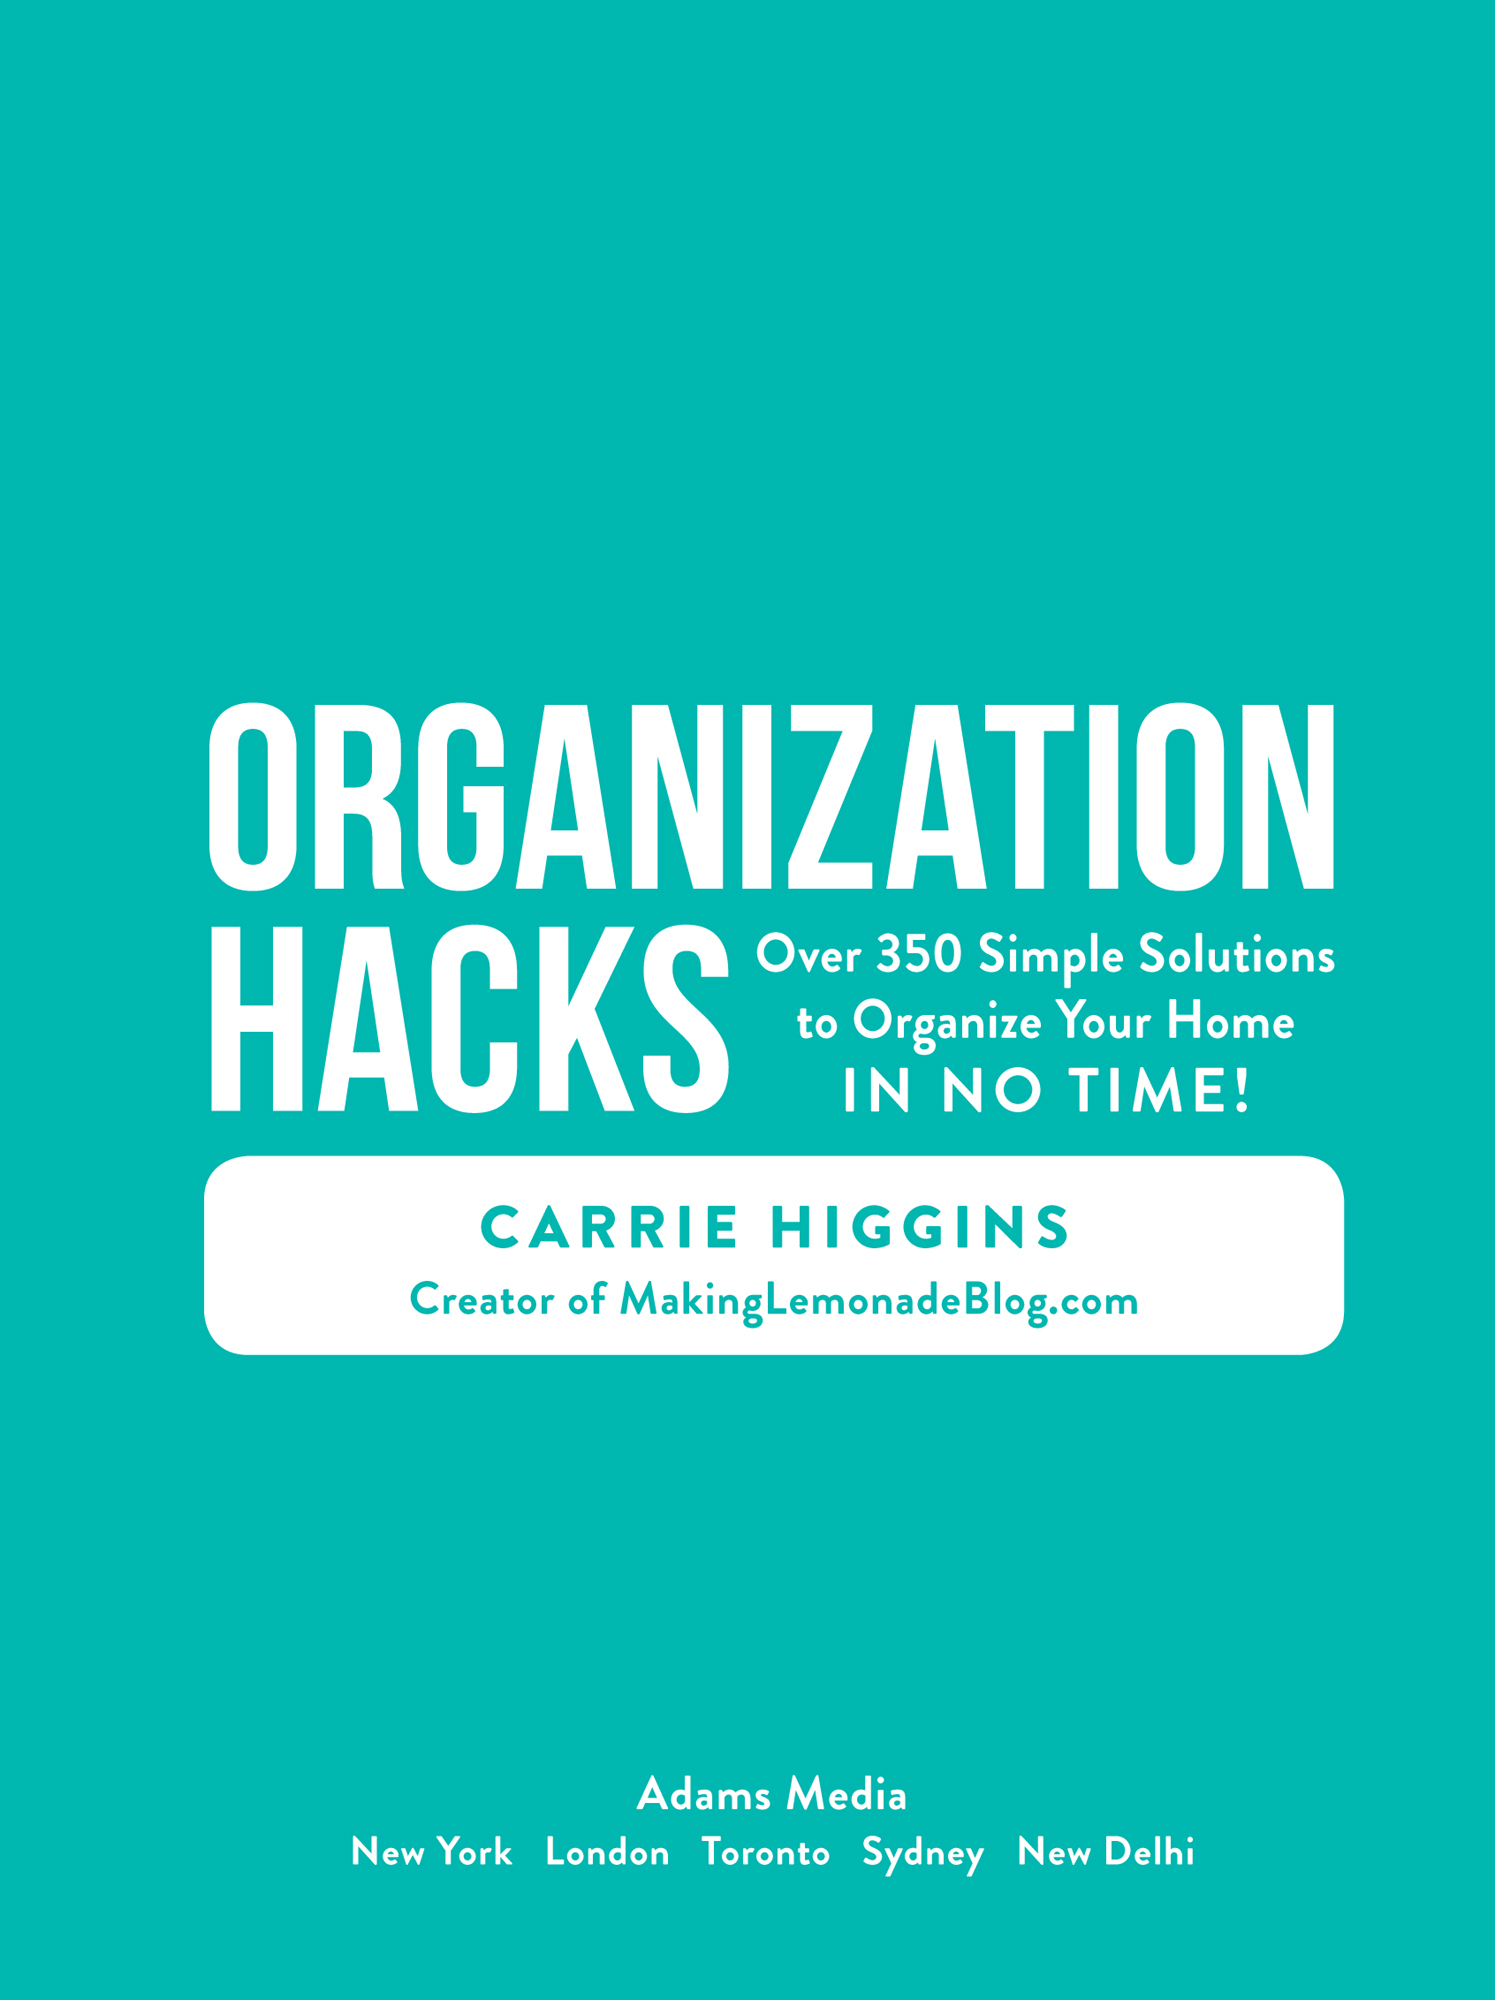 Organization Hacks Over 350 Simple Solutions to Organize Your Home in No Time - image 2